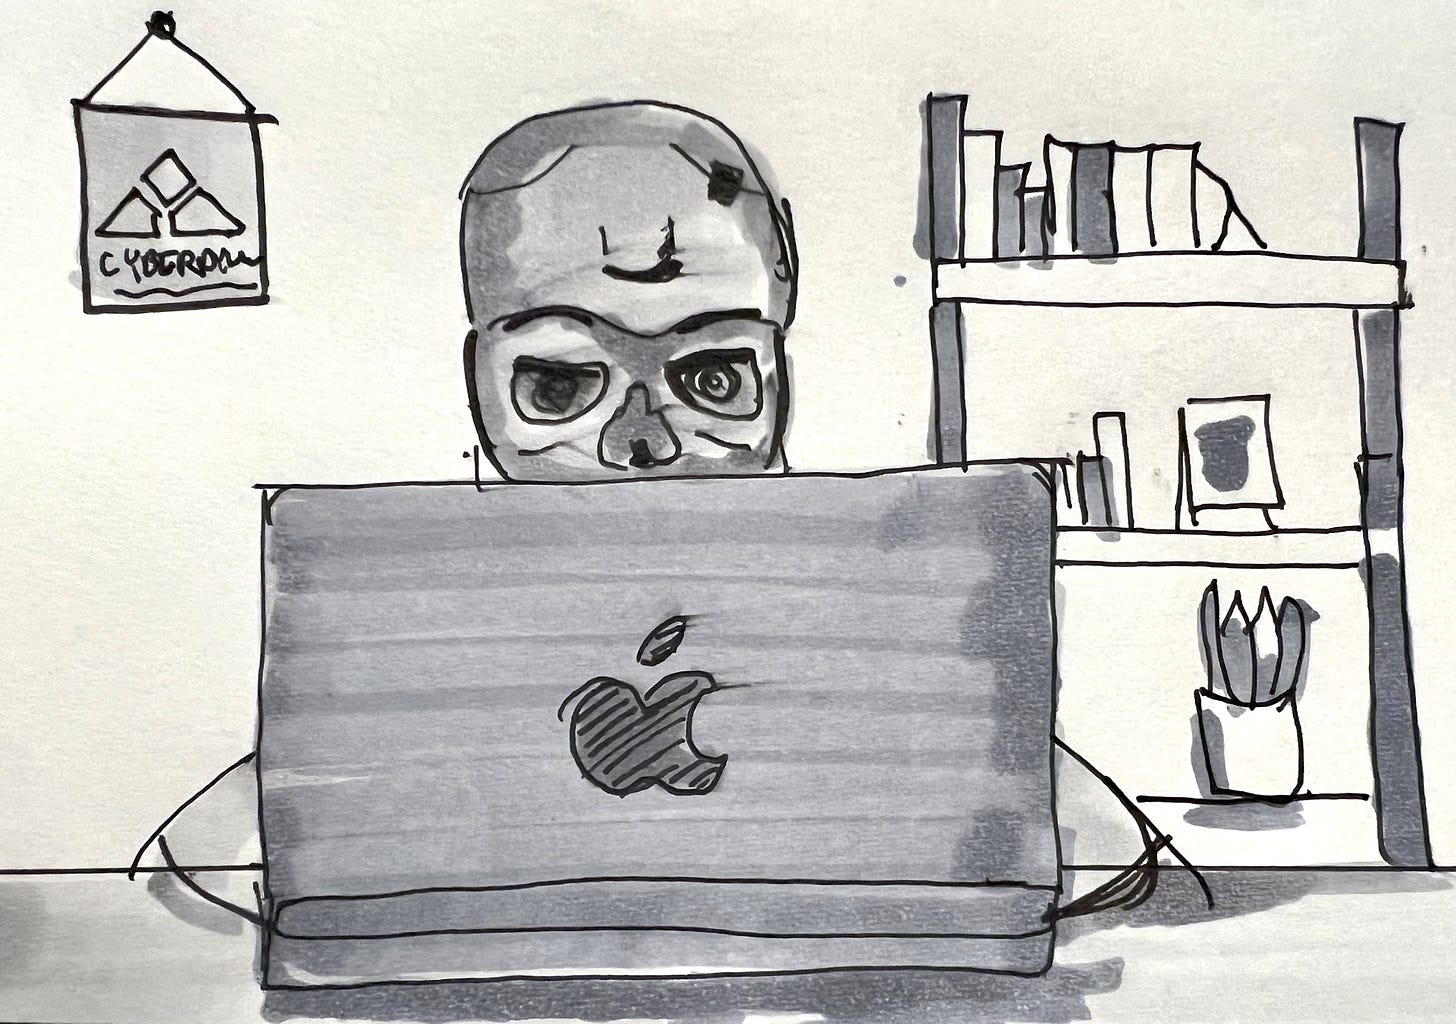 Image of an endoskeleton T-800 learning to code in front of a MacBook